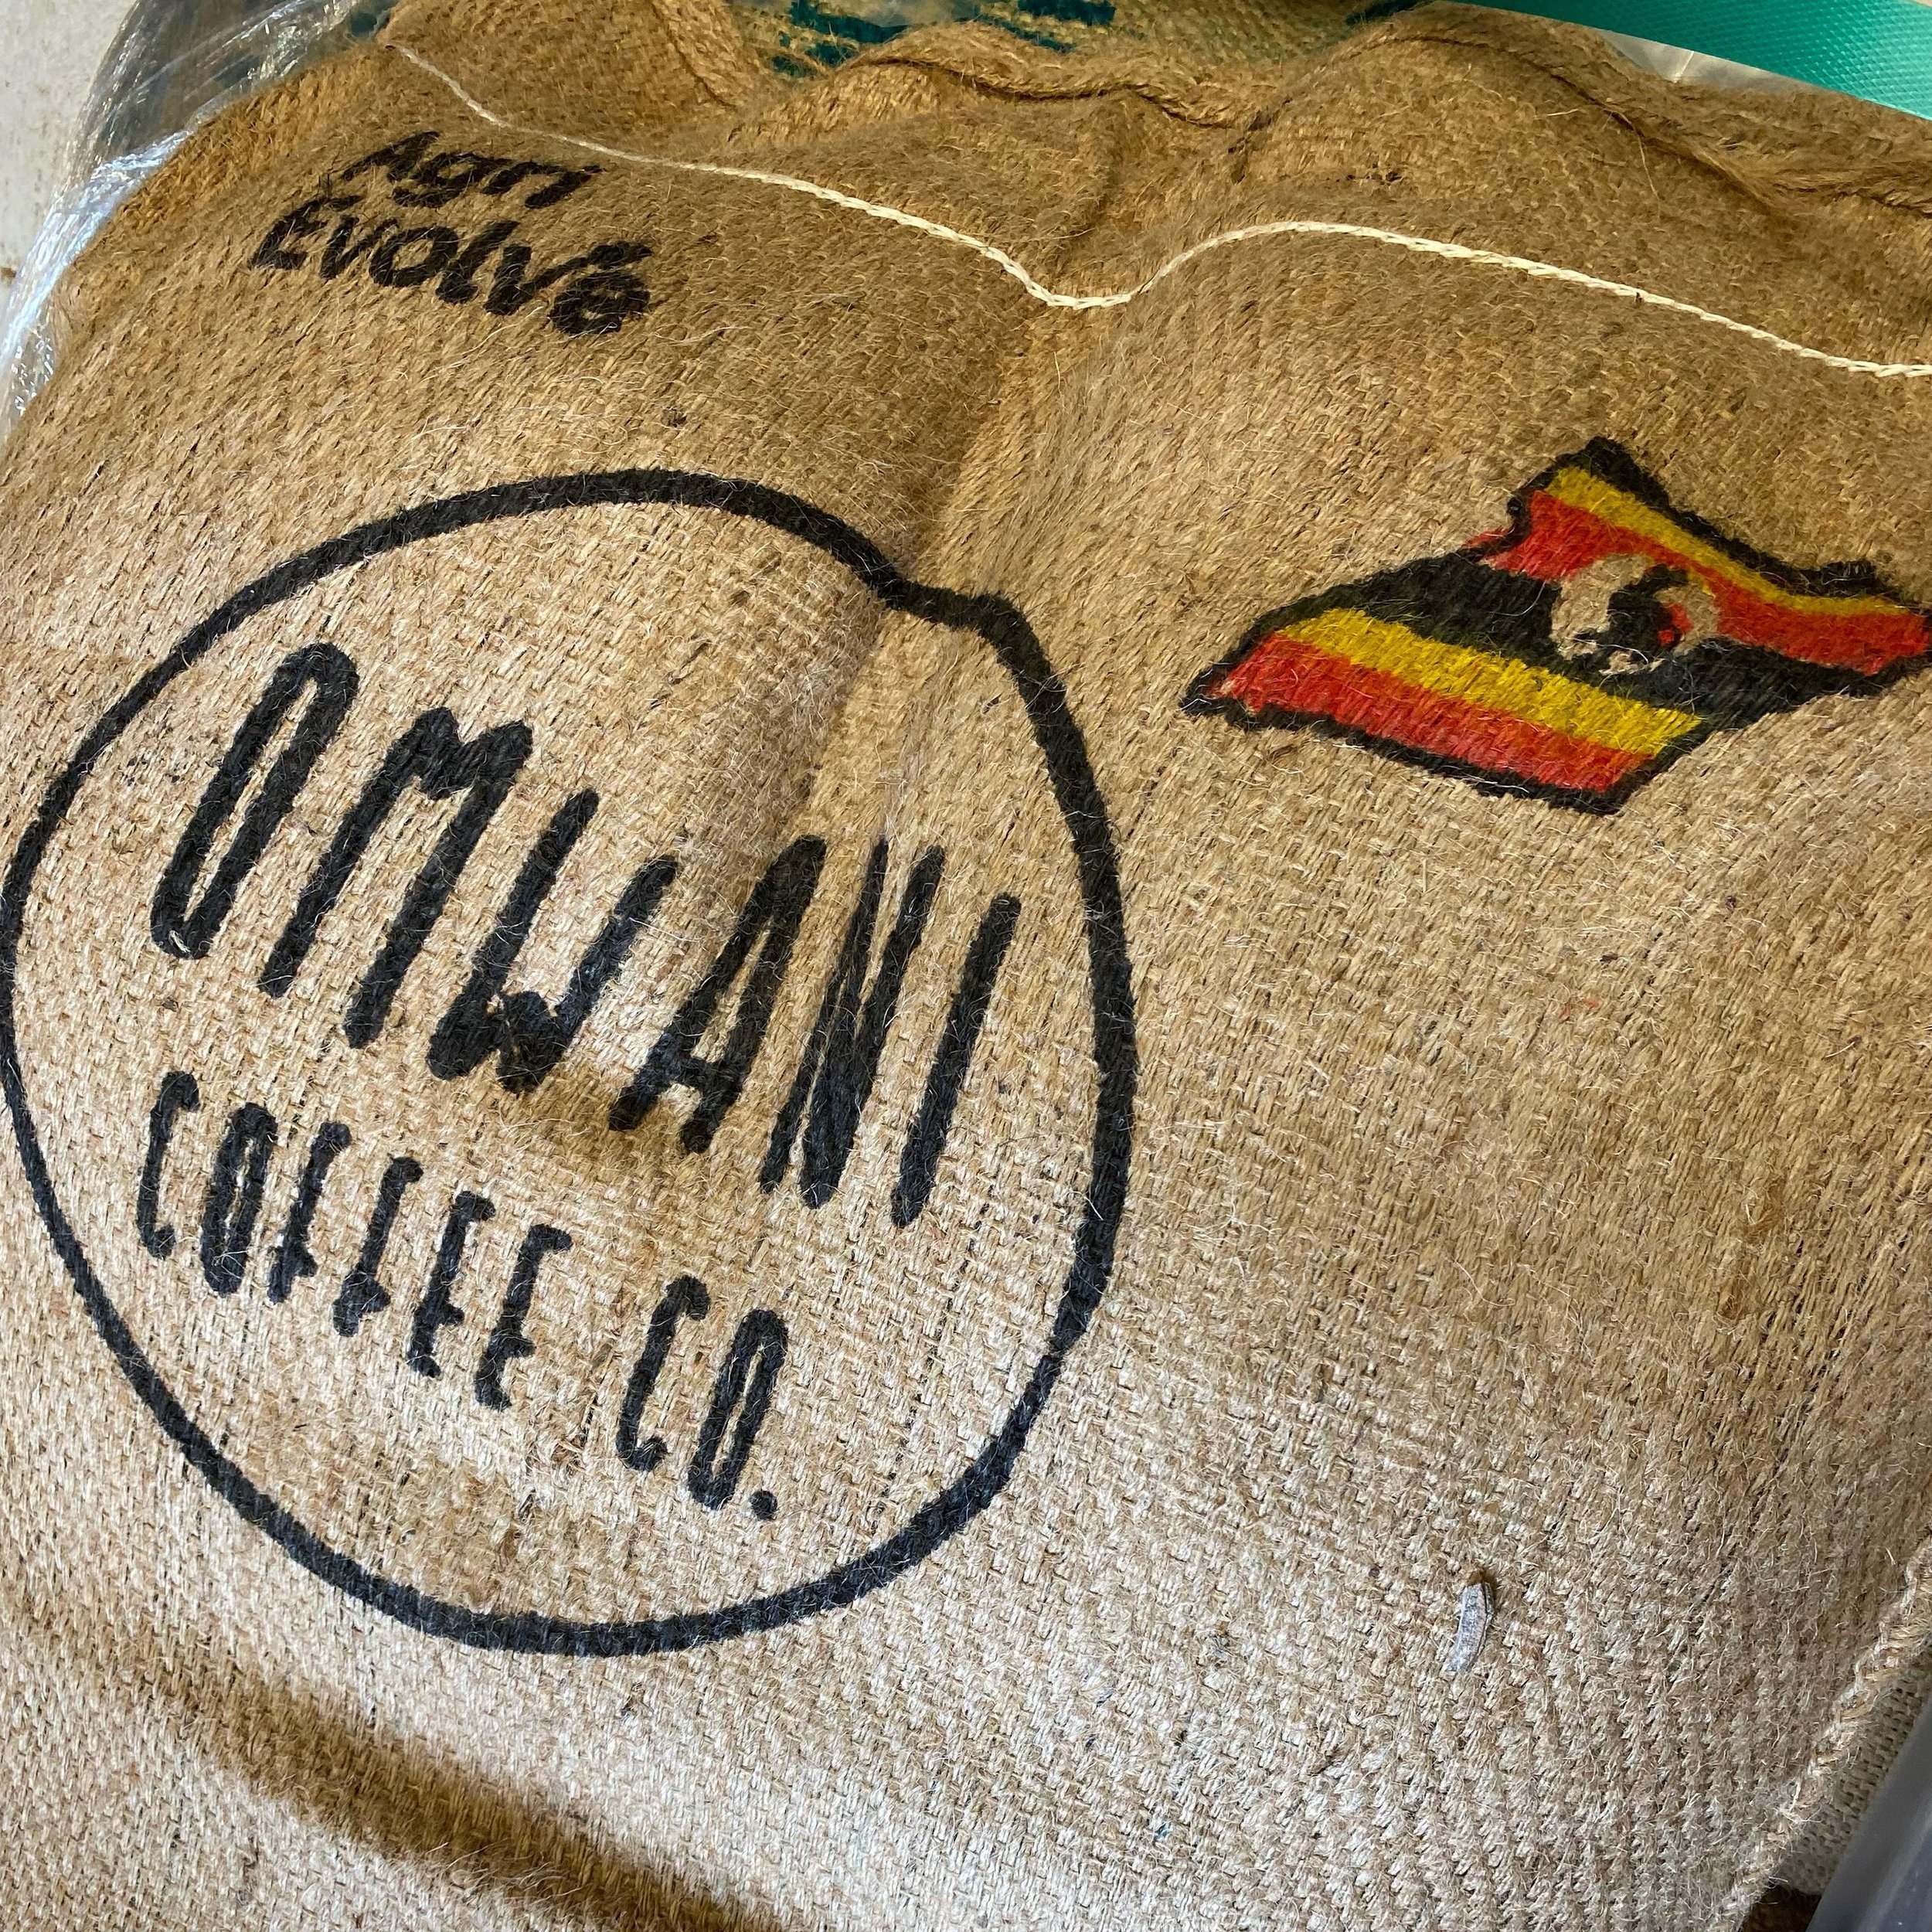 Bukonzo Dream is back in stock! Genevieve ~ time for you and Peter to do your thing! 🔥 🔥🔥
***NEW HARVEST ***
Great work @agri_evolve @omwanicoffee 🙏🏻🙏🏻

#bukonzodream 
#larsandmargocoffee 
#ugandancoffee 
#cornwall
#natural 
#coffeenerd 
#coff